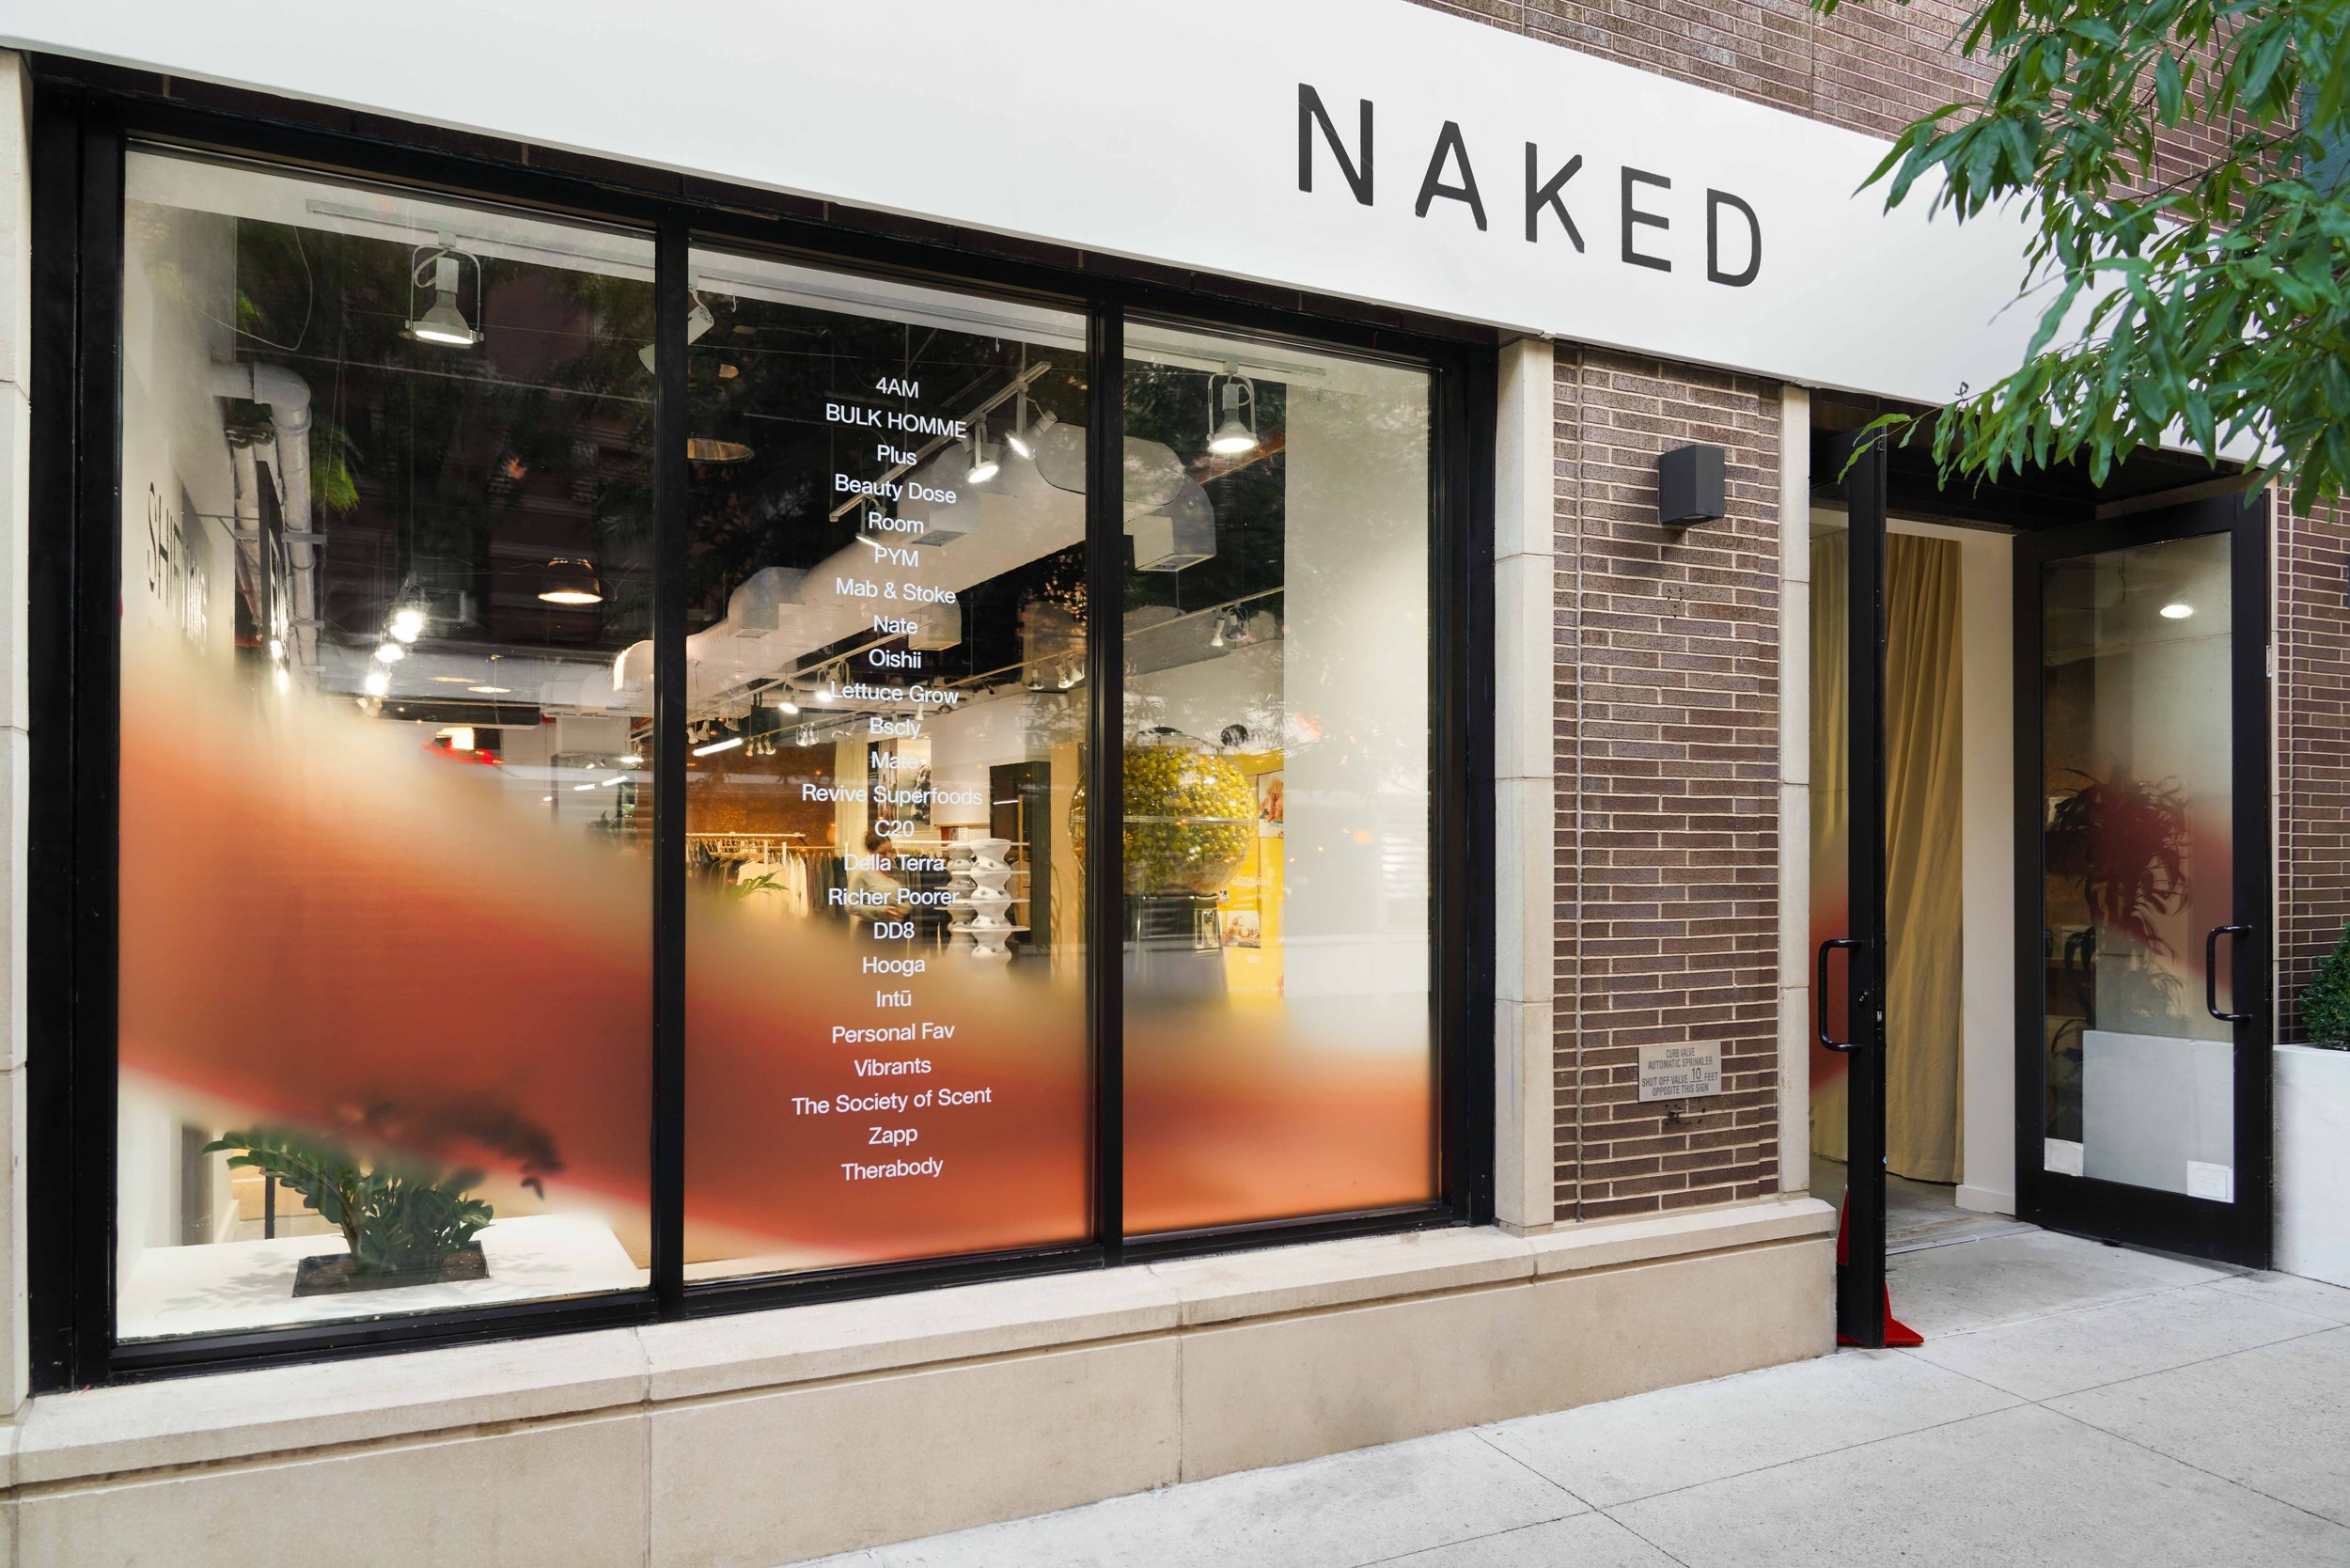  NAKED - NYC Store Design  2021   